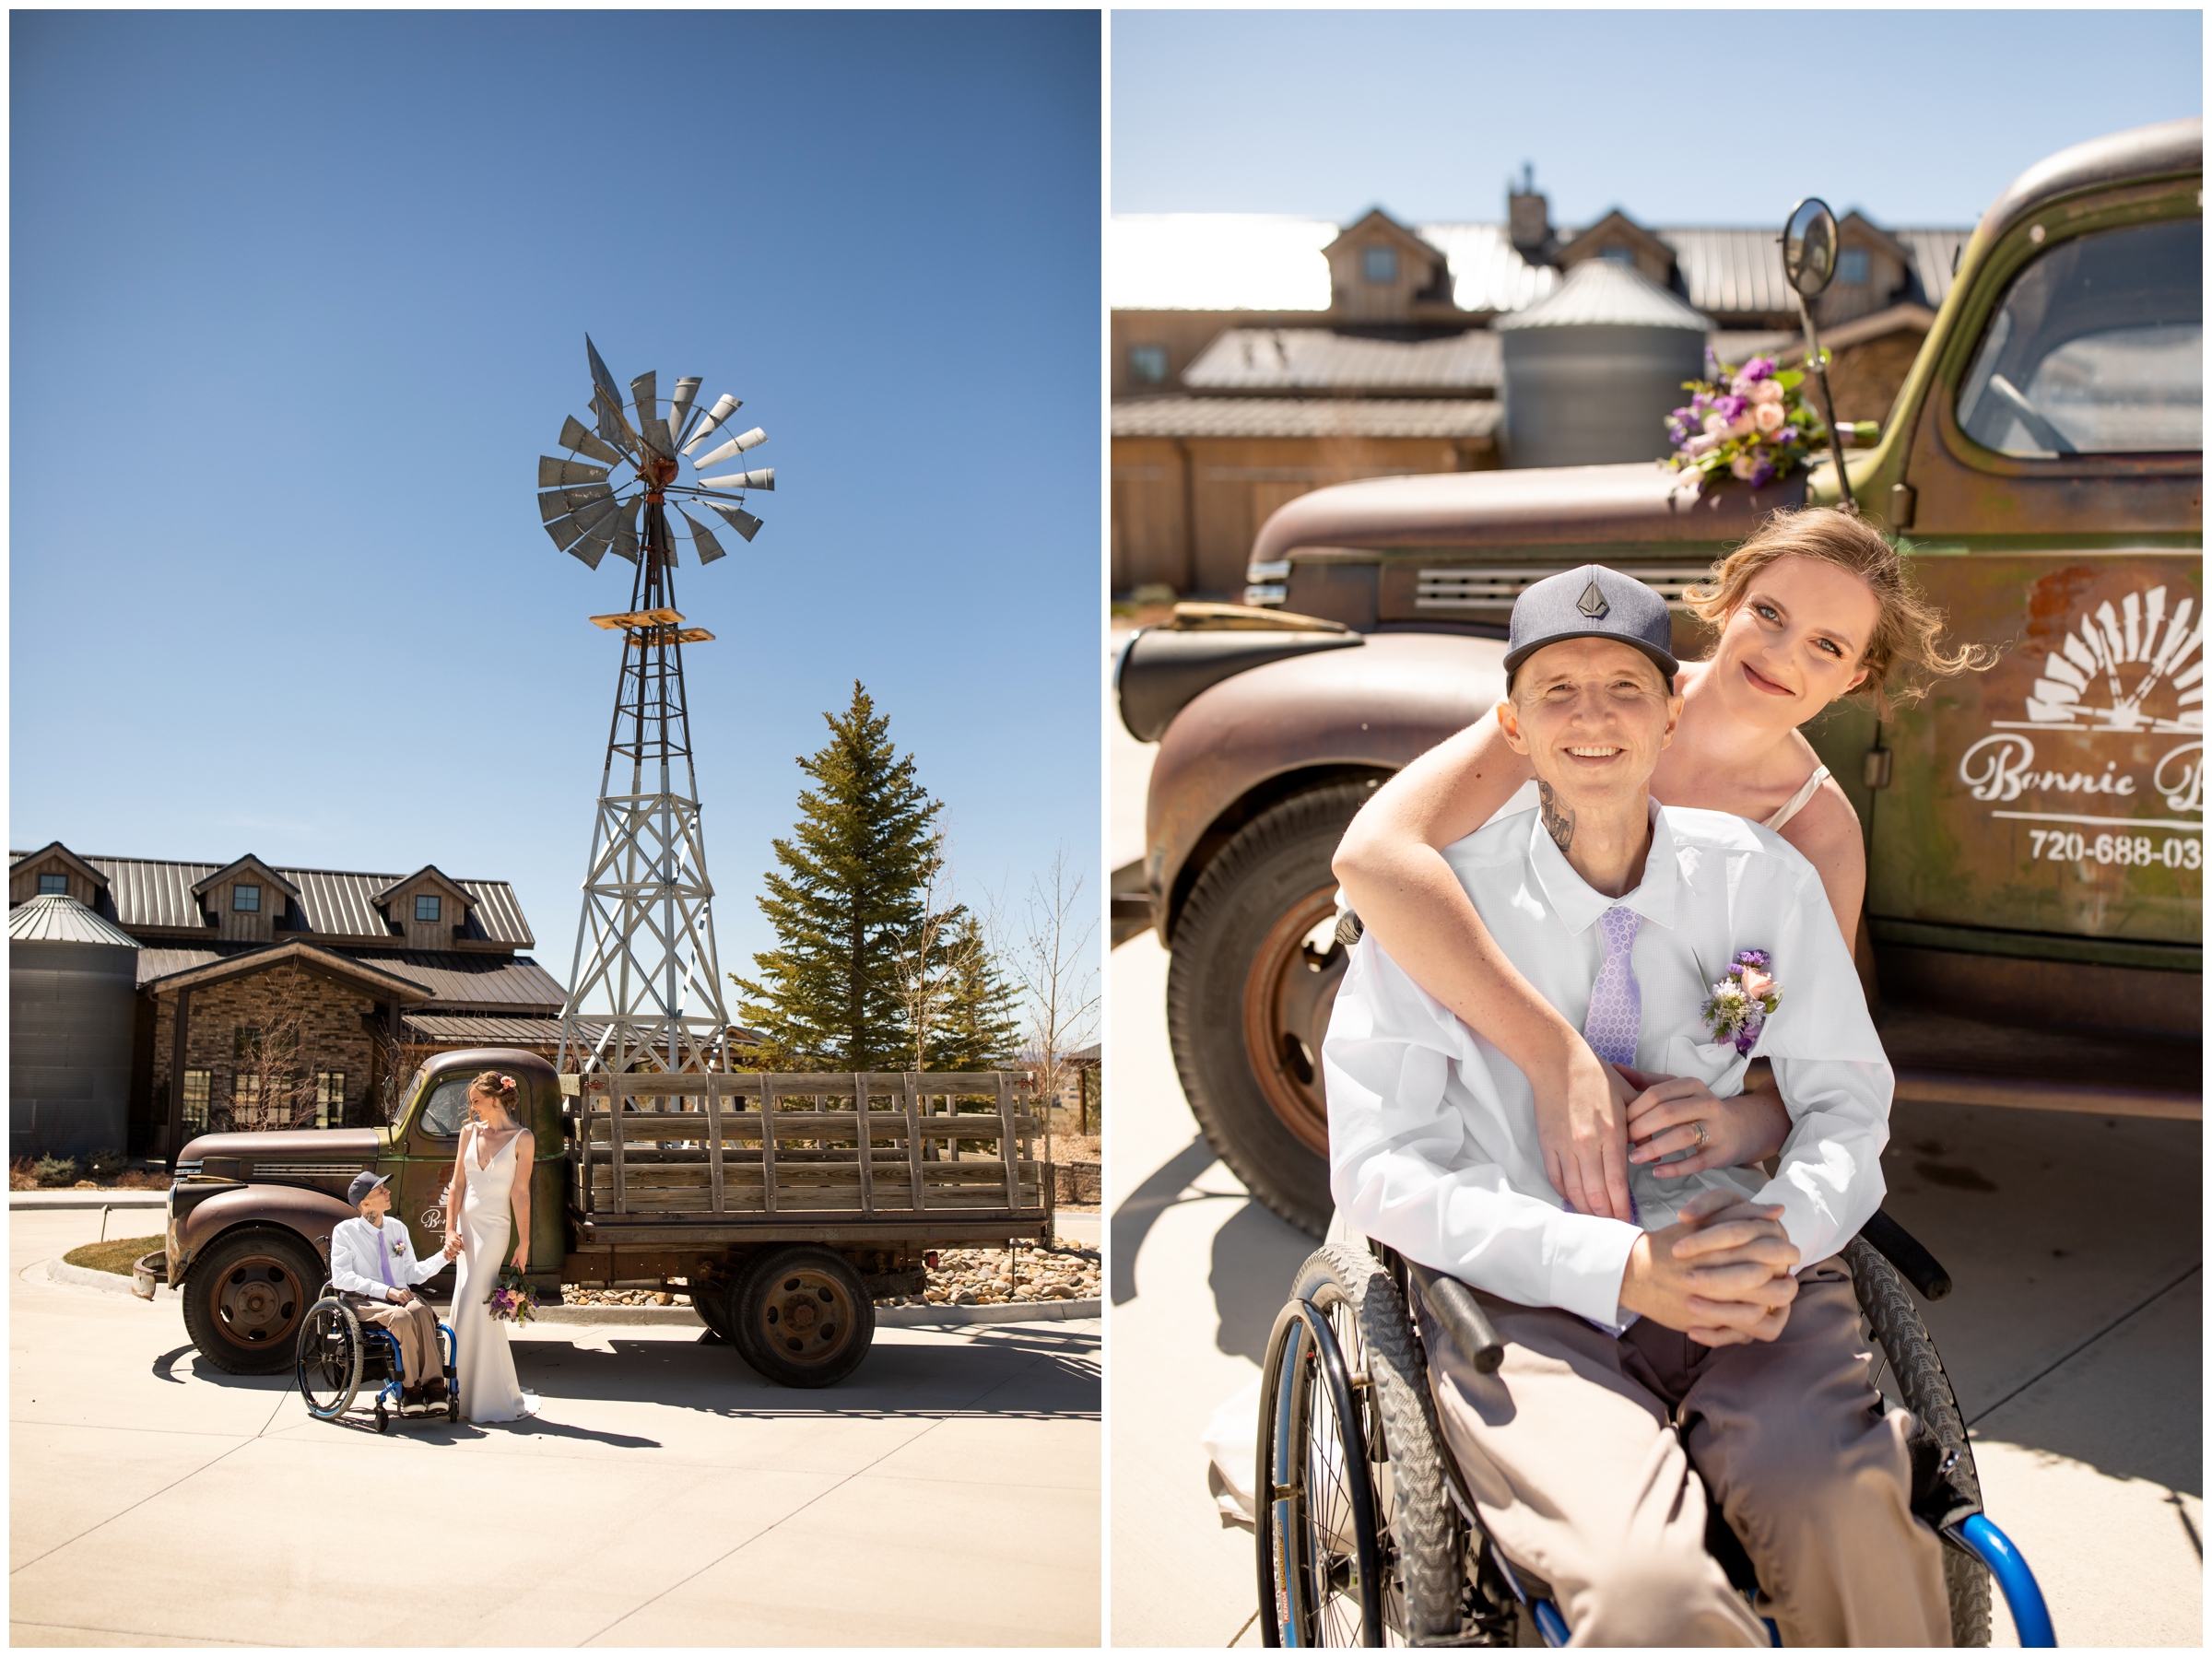 couple posing in front of rustic truck and windmill during wedding portraits at Bonnie Blues event venue in Colorado 